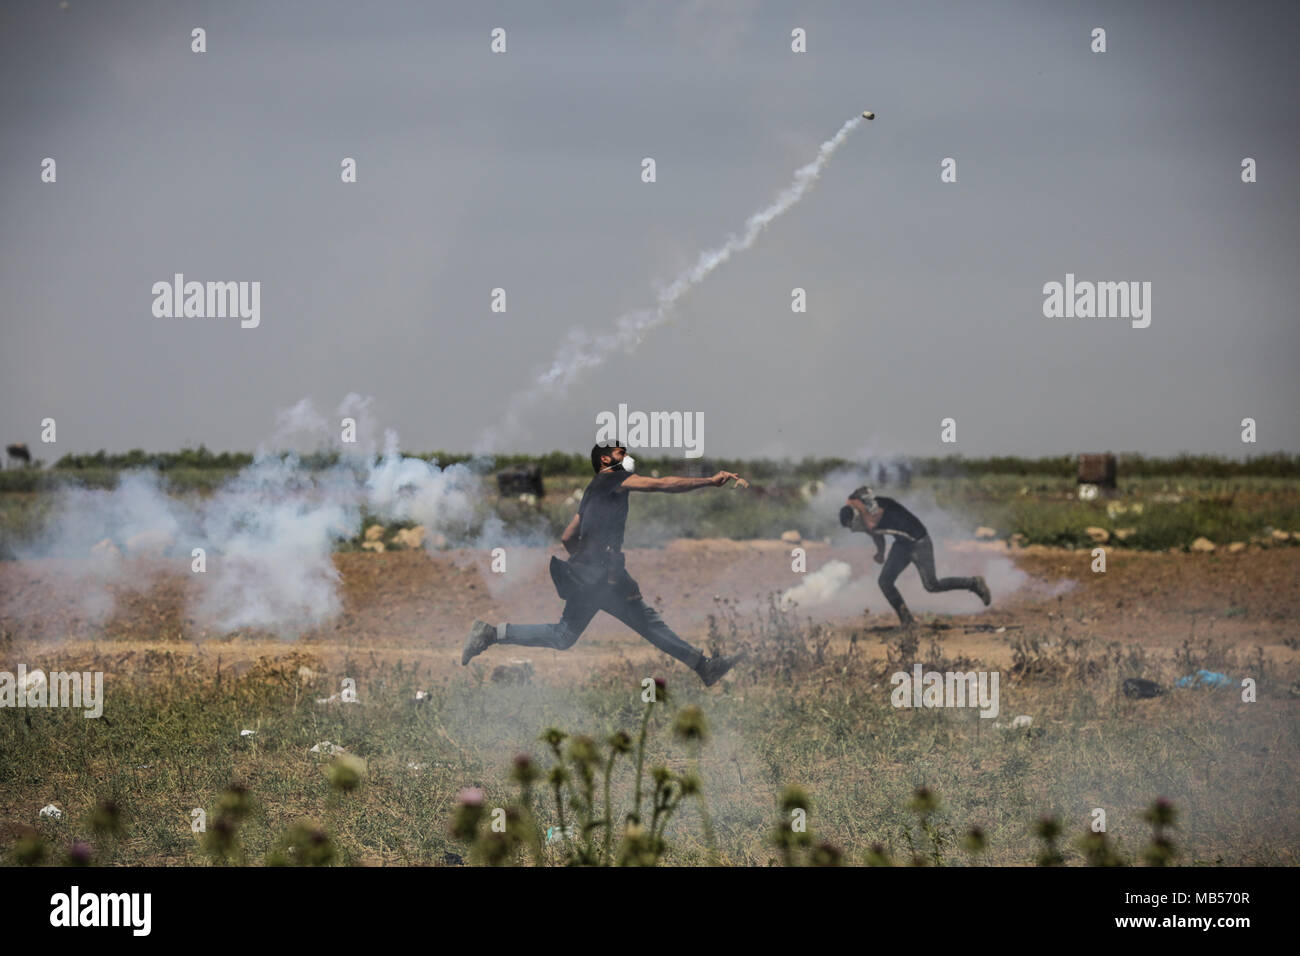 Gaza. 06th Apr, 2018. A Palestinian protester uses slingshot against Israeli security forces as they burn tires during a demonstration demanding the right of return and removal of the blockade following the 'Great March of Return'. Credit: Nidal Alwaheidi/Pacific Press/Alamy Live News Stock Photo